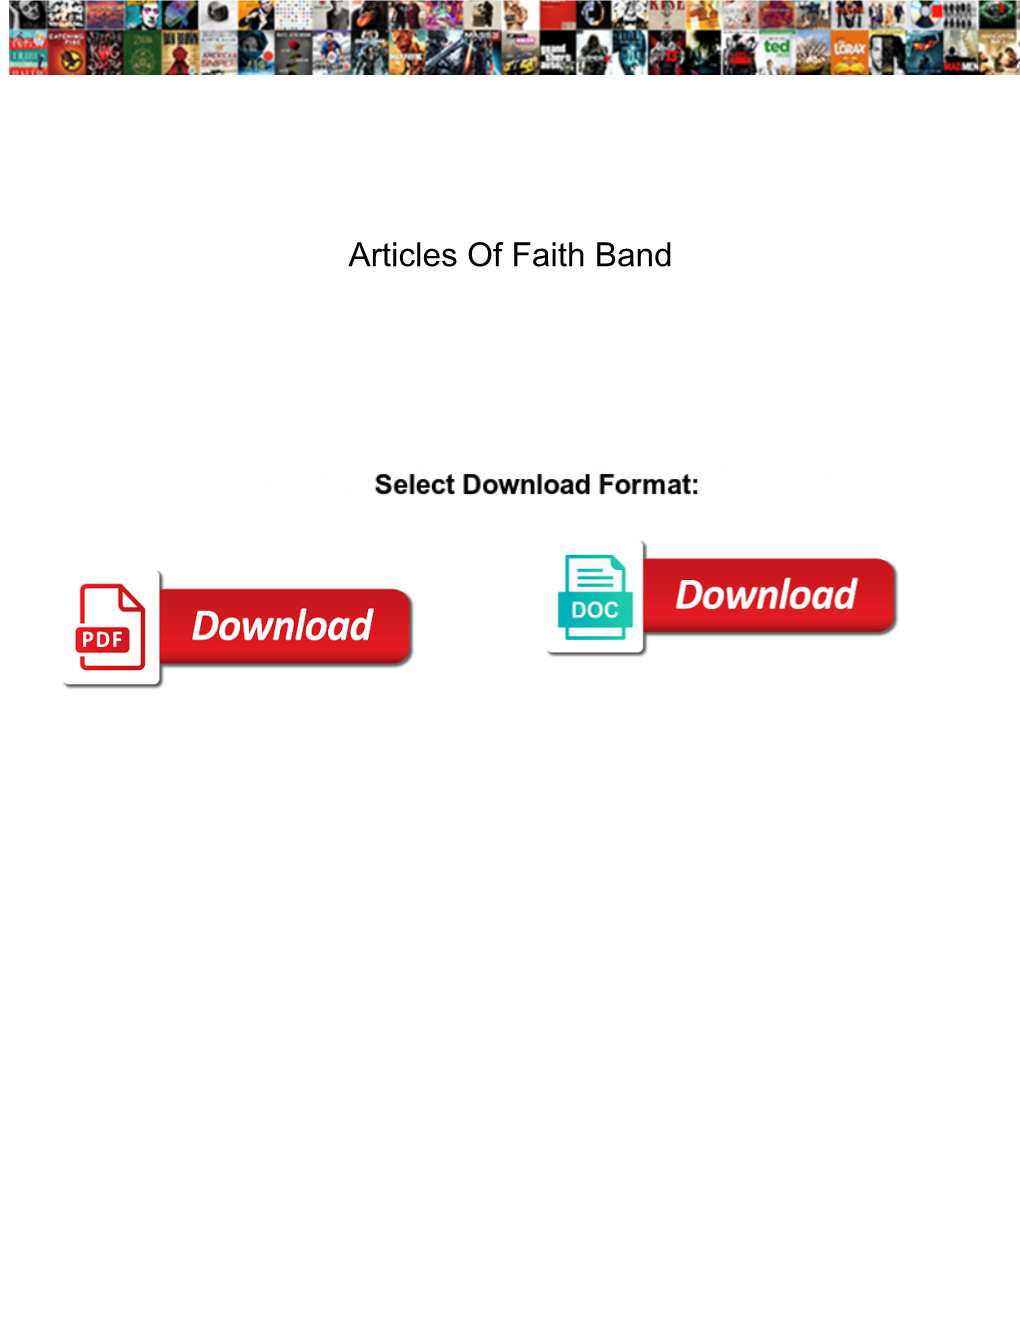 Articles of Faith Band